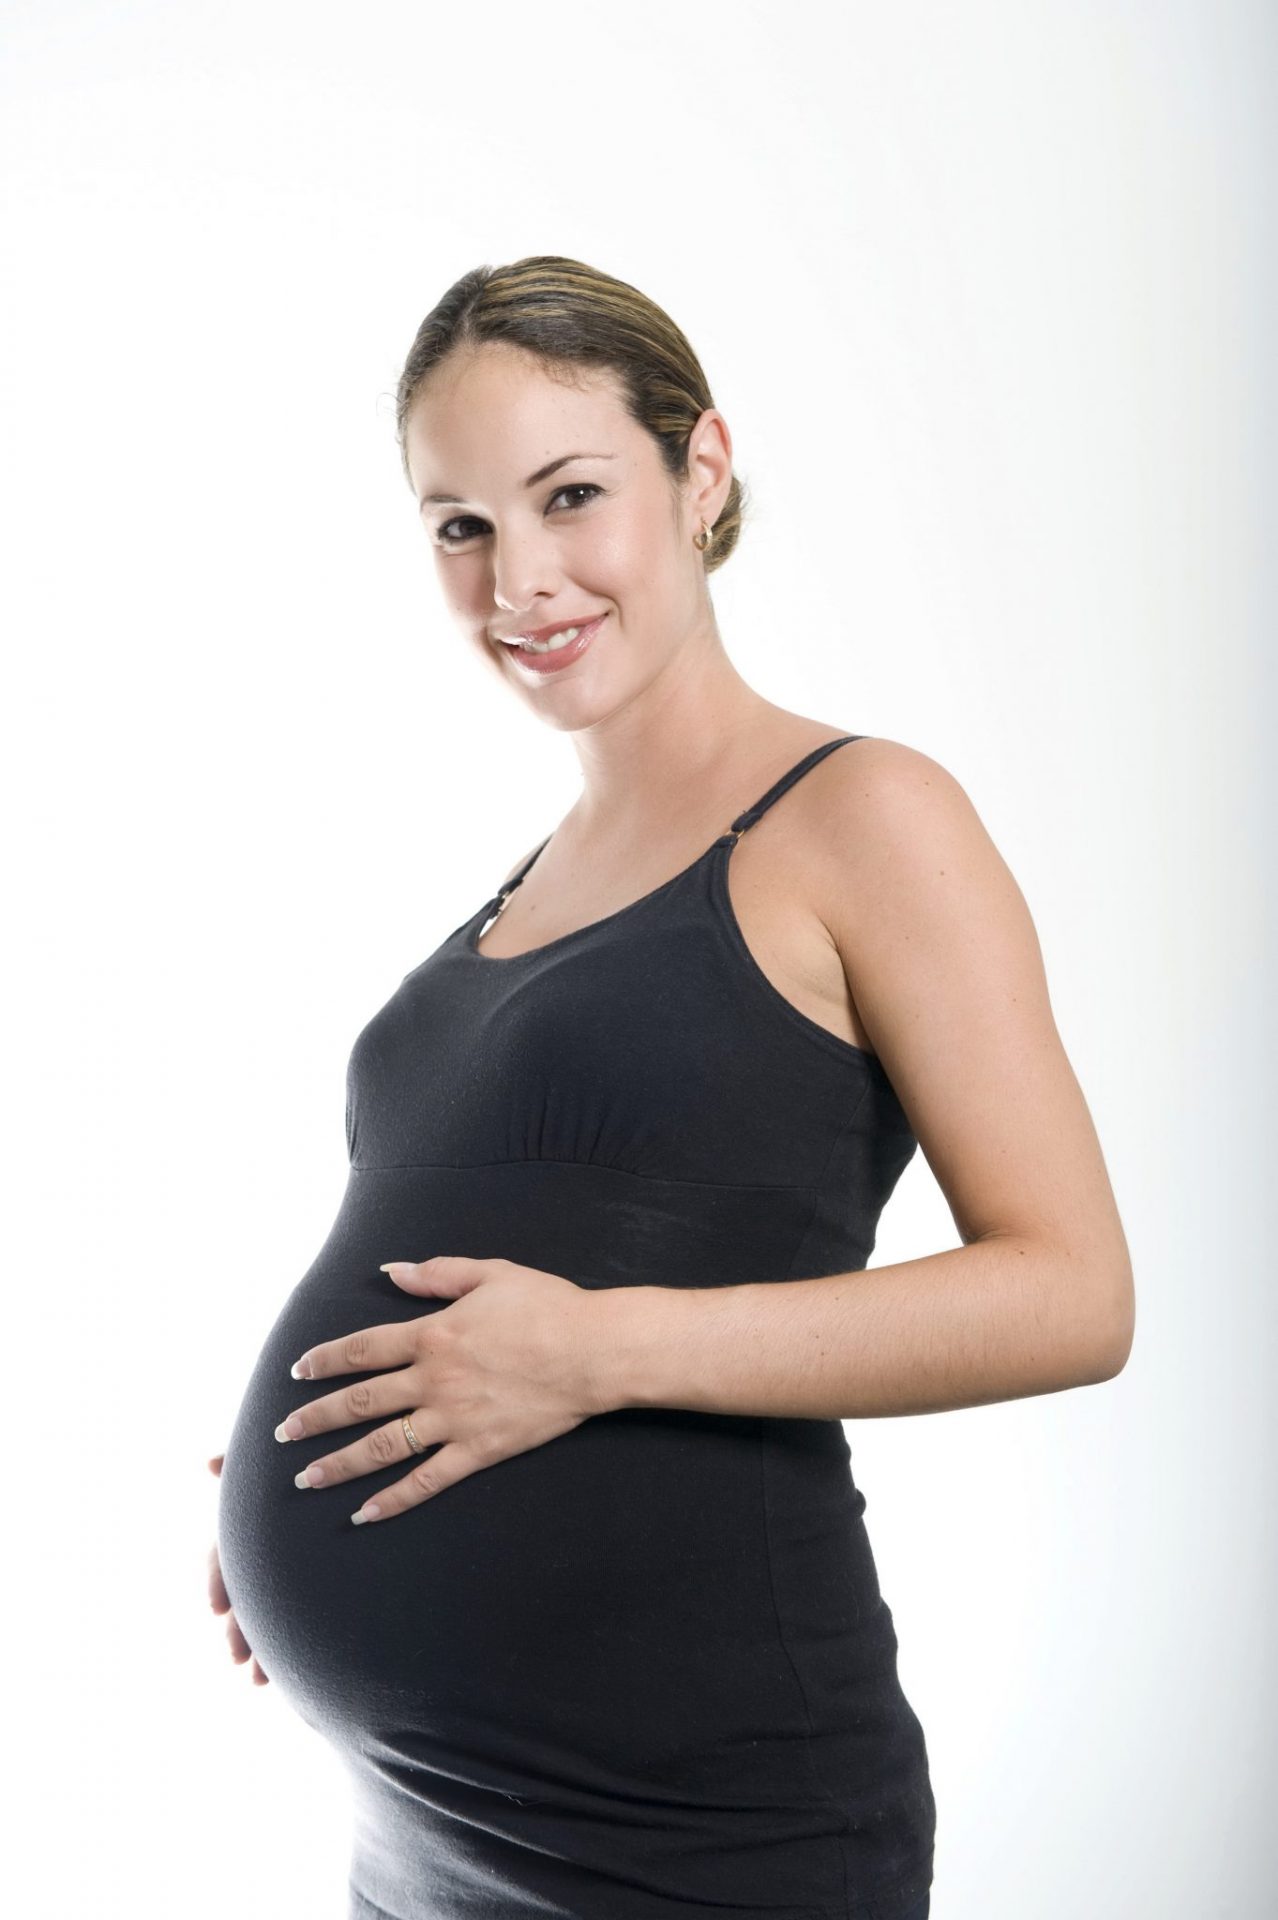 Periodontal Disease and Pregnancy Is Very Concerning